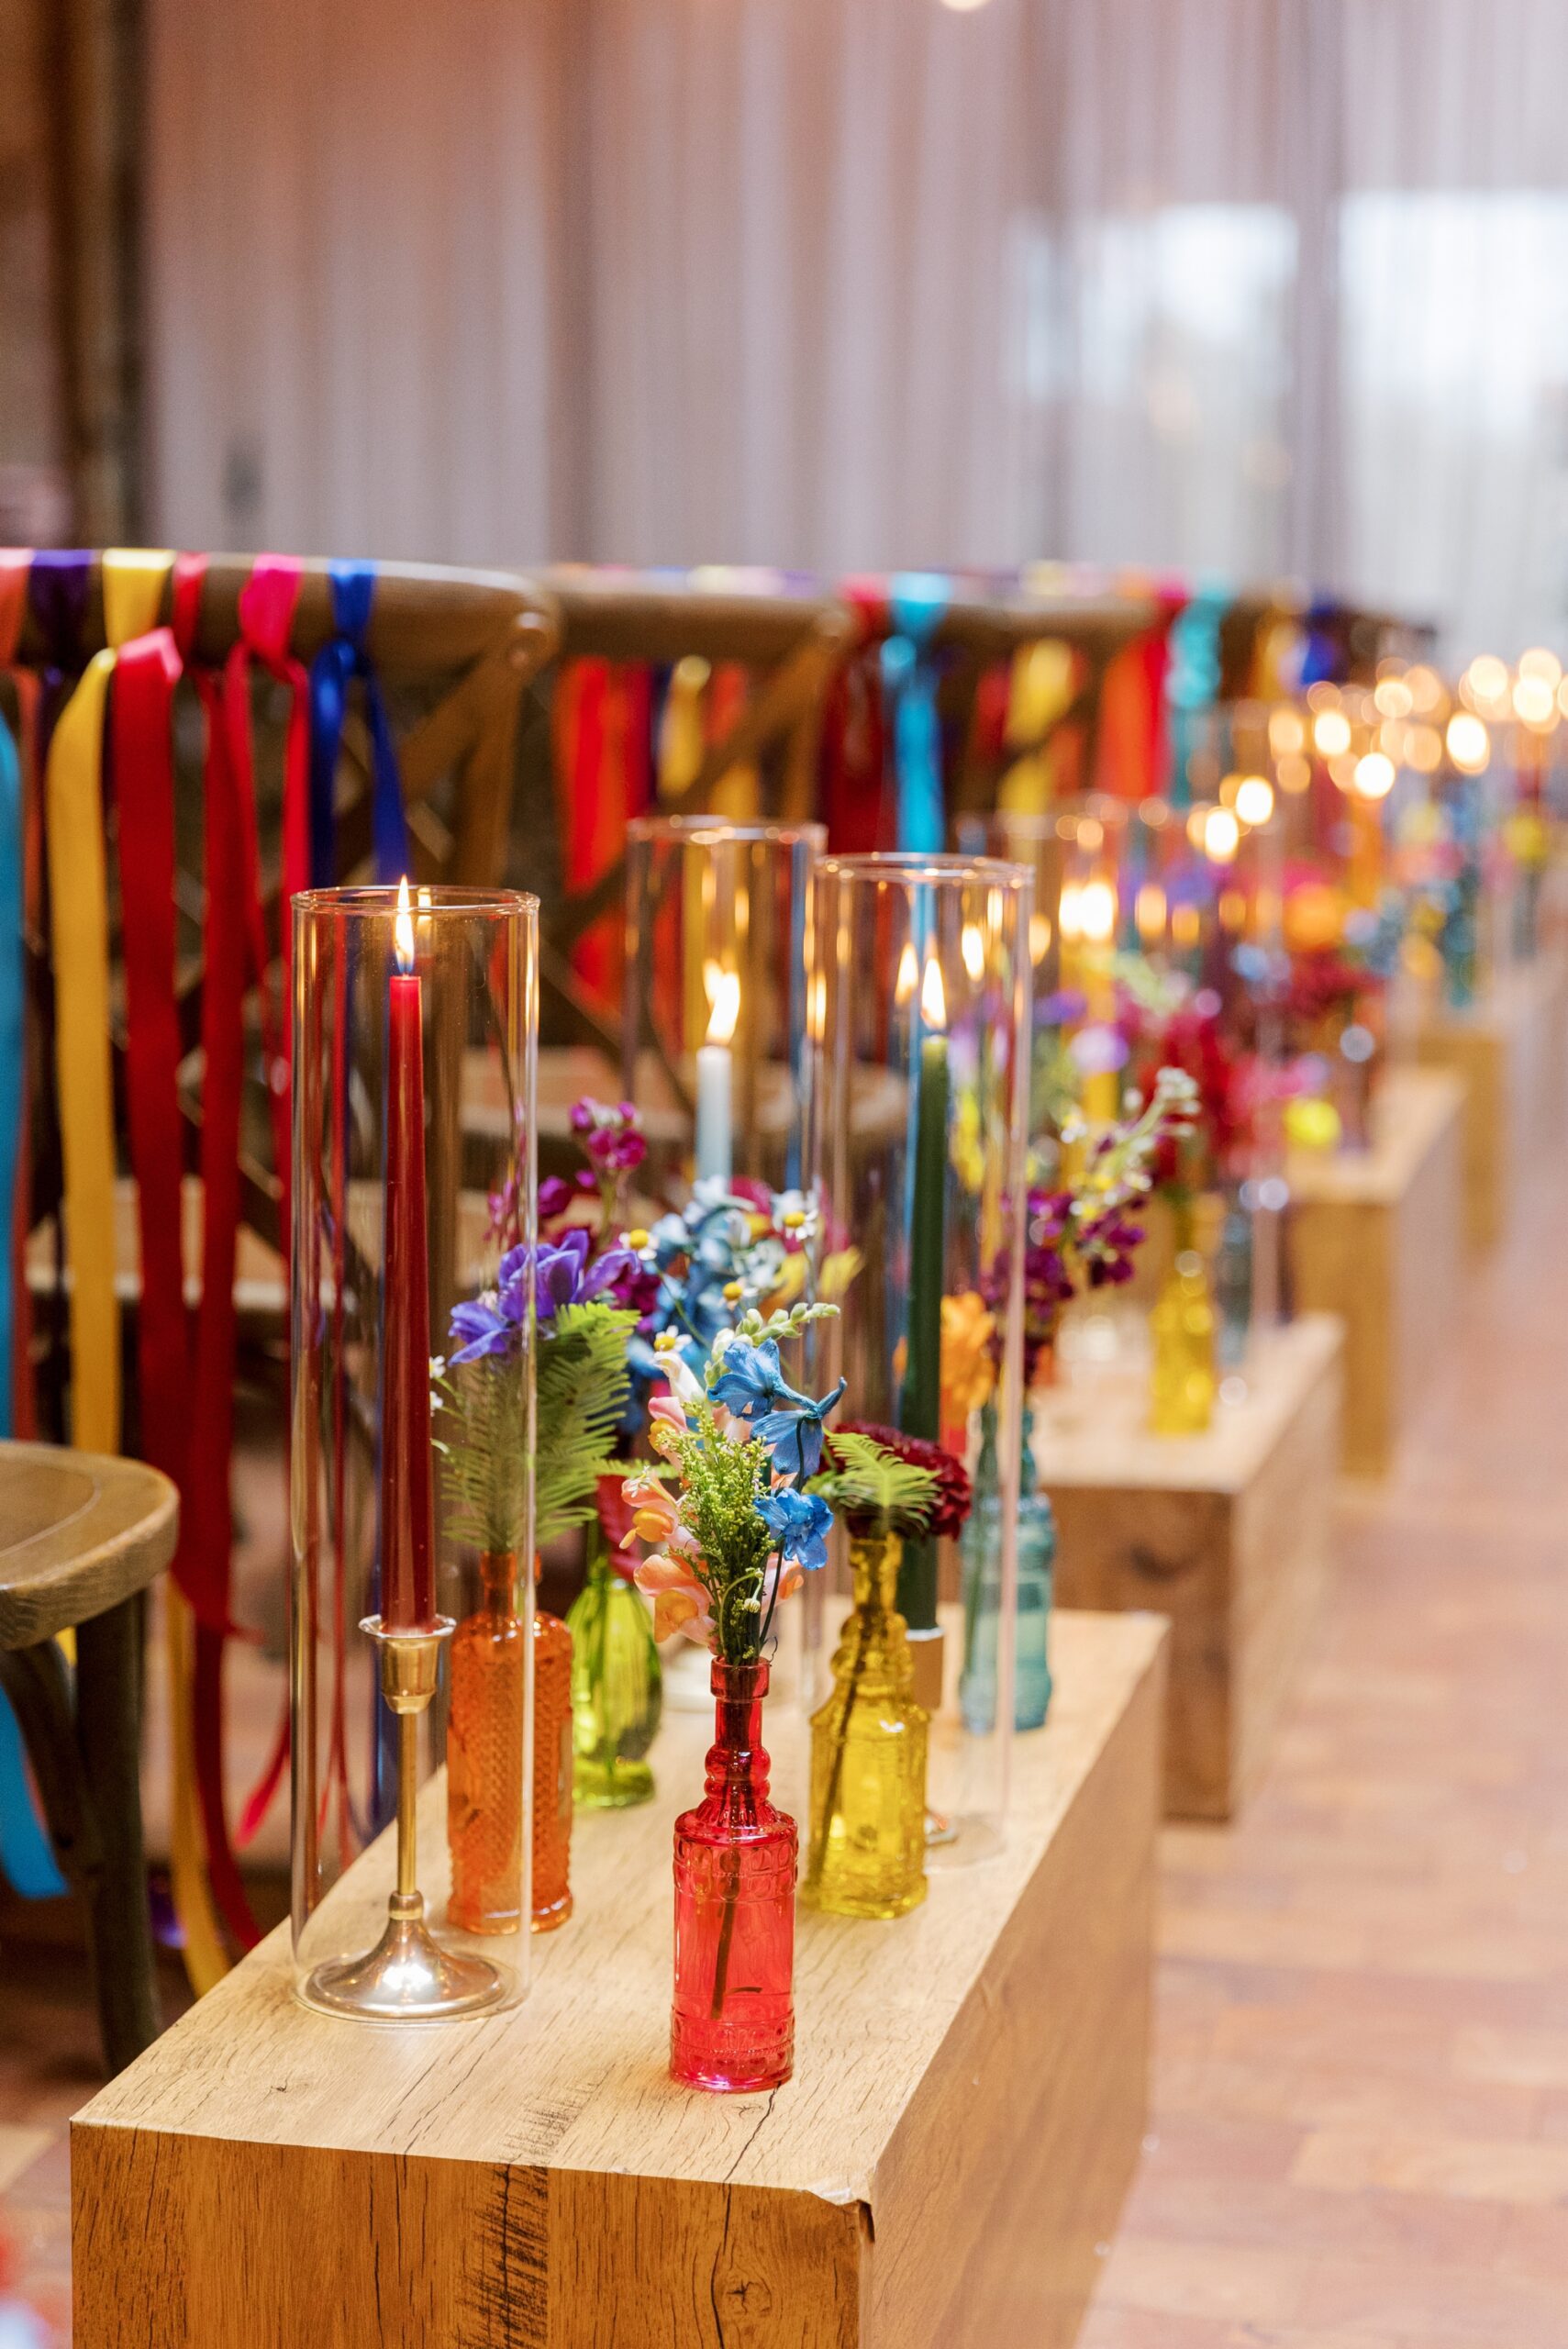 The colorful wedding aisle markers fit the colorful wedding palette